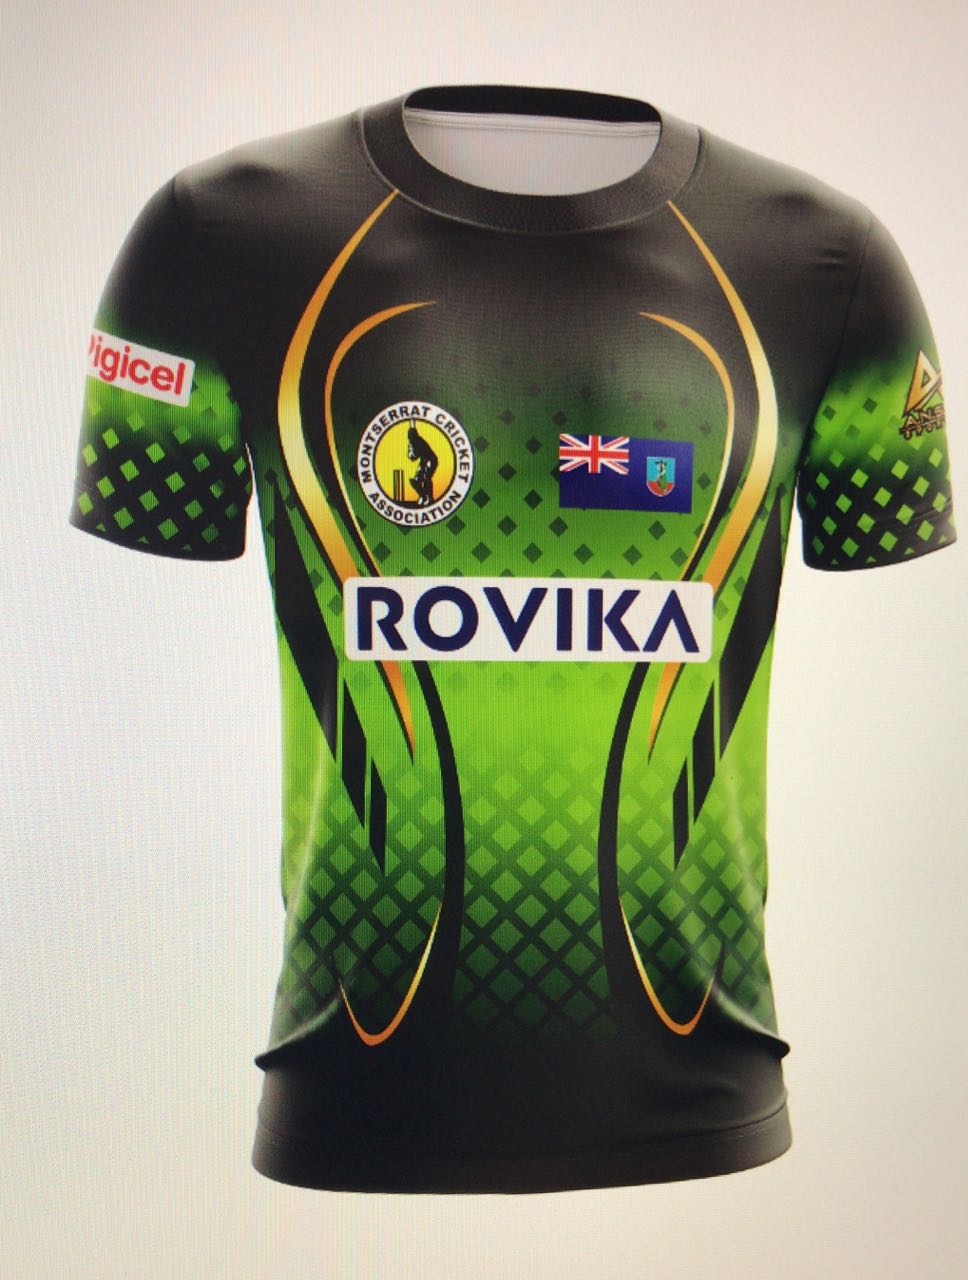 Local Software Firm Sponsors National Cricket Team Uniforms